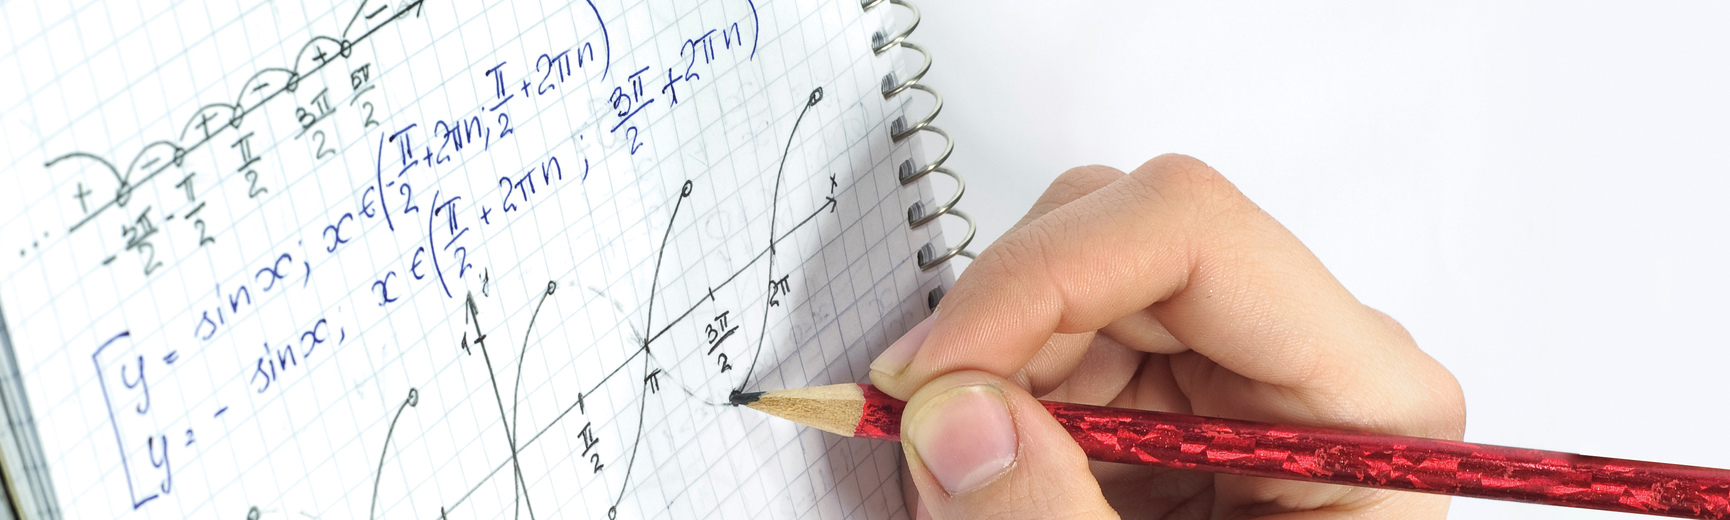 Student writing mathematics equation on notebook with pencil